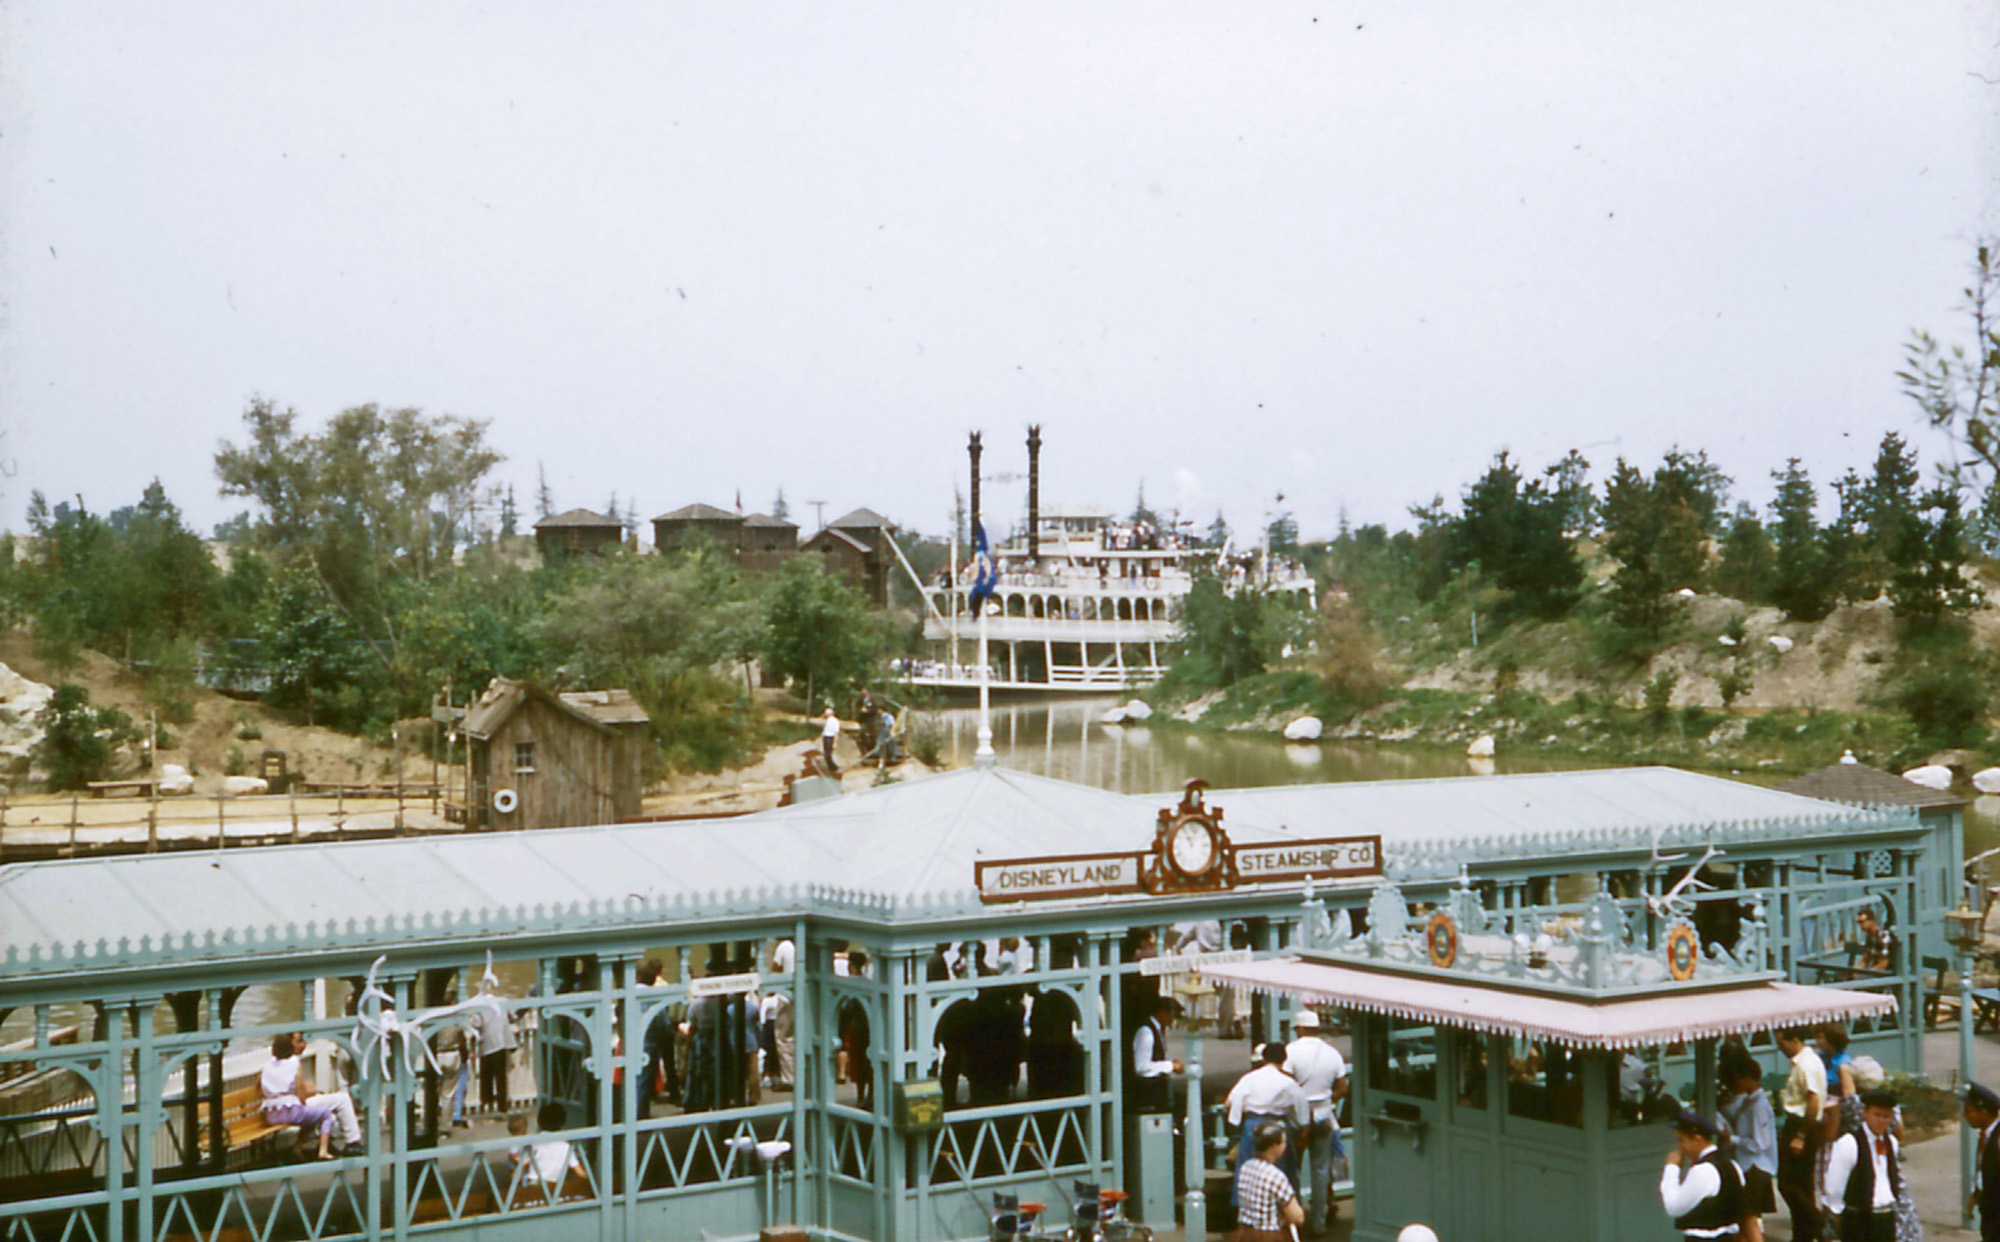 More early Disneyland, from a ancient suitcase found next to a freeway on ramp. View full size.